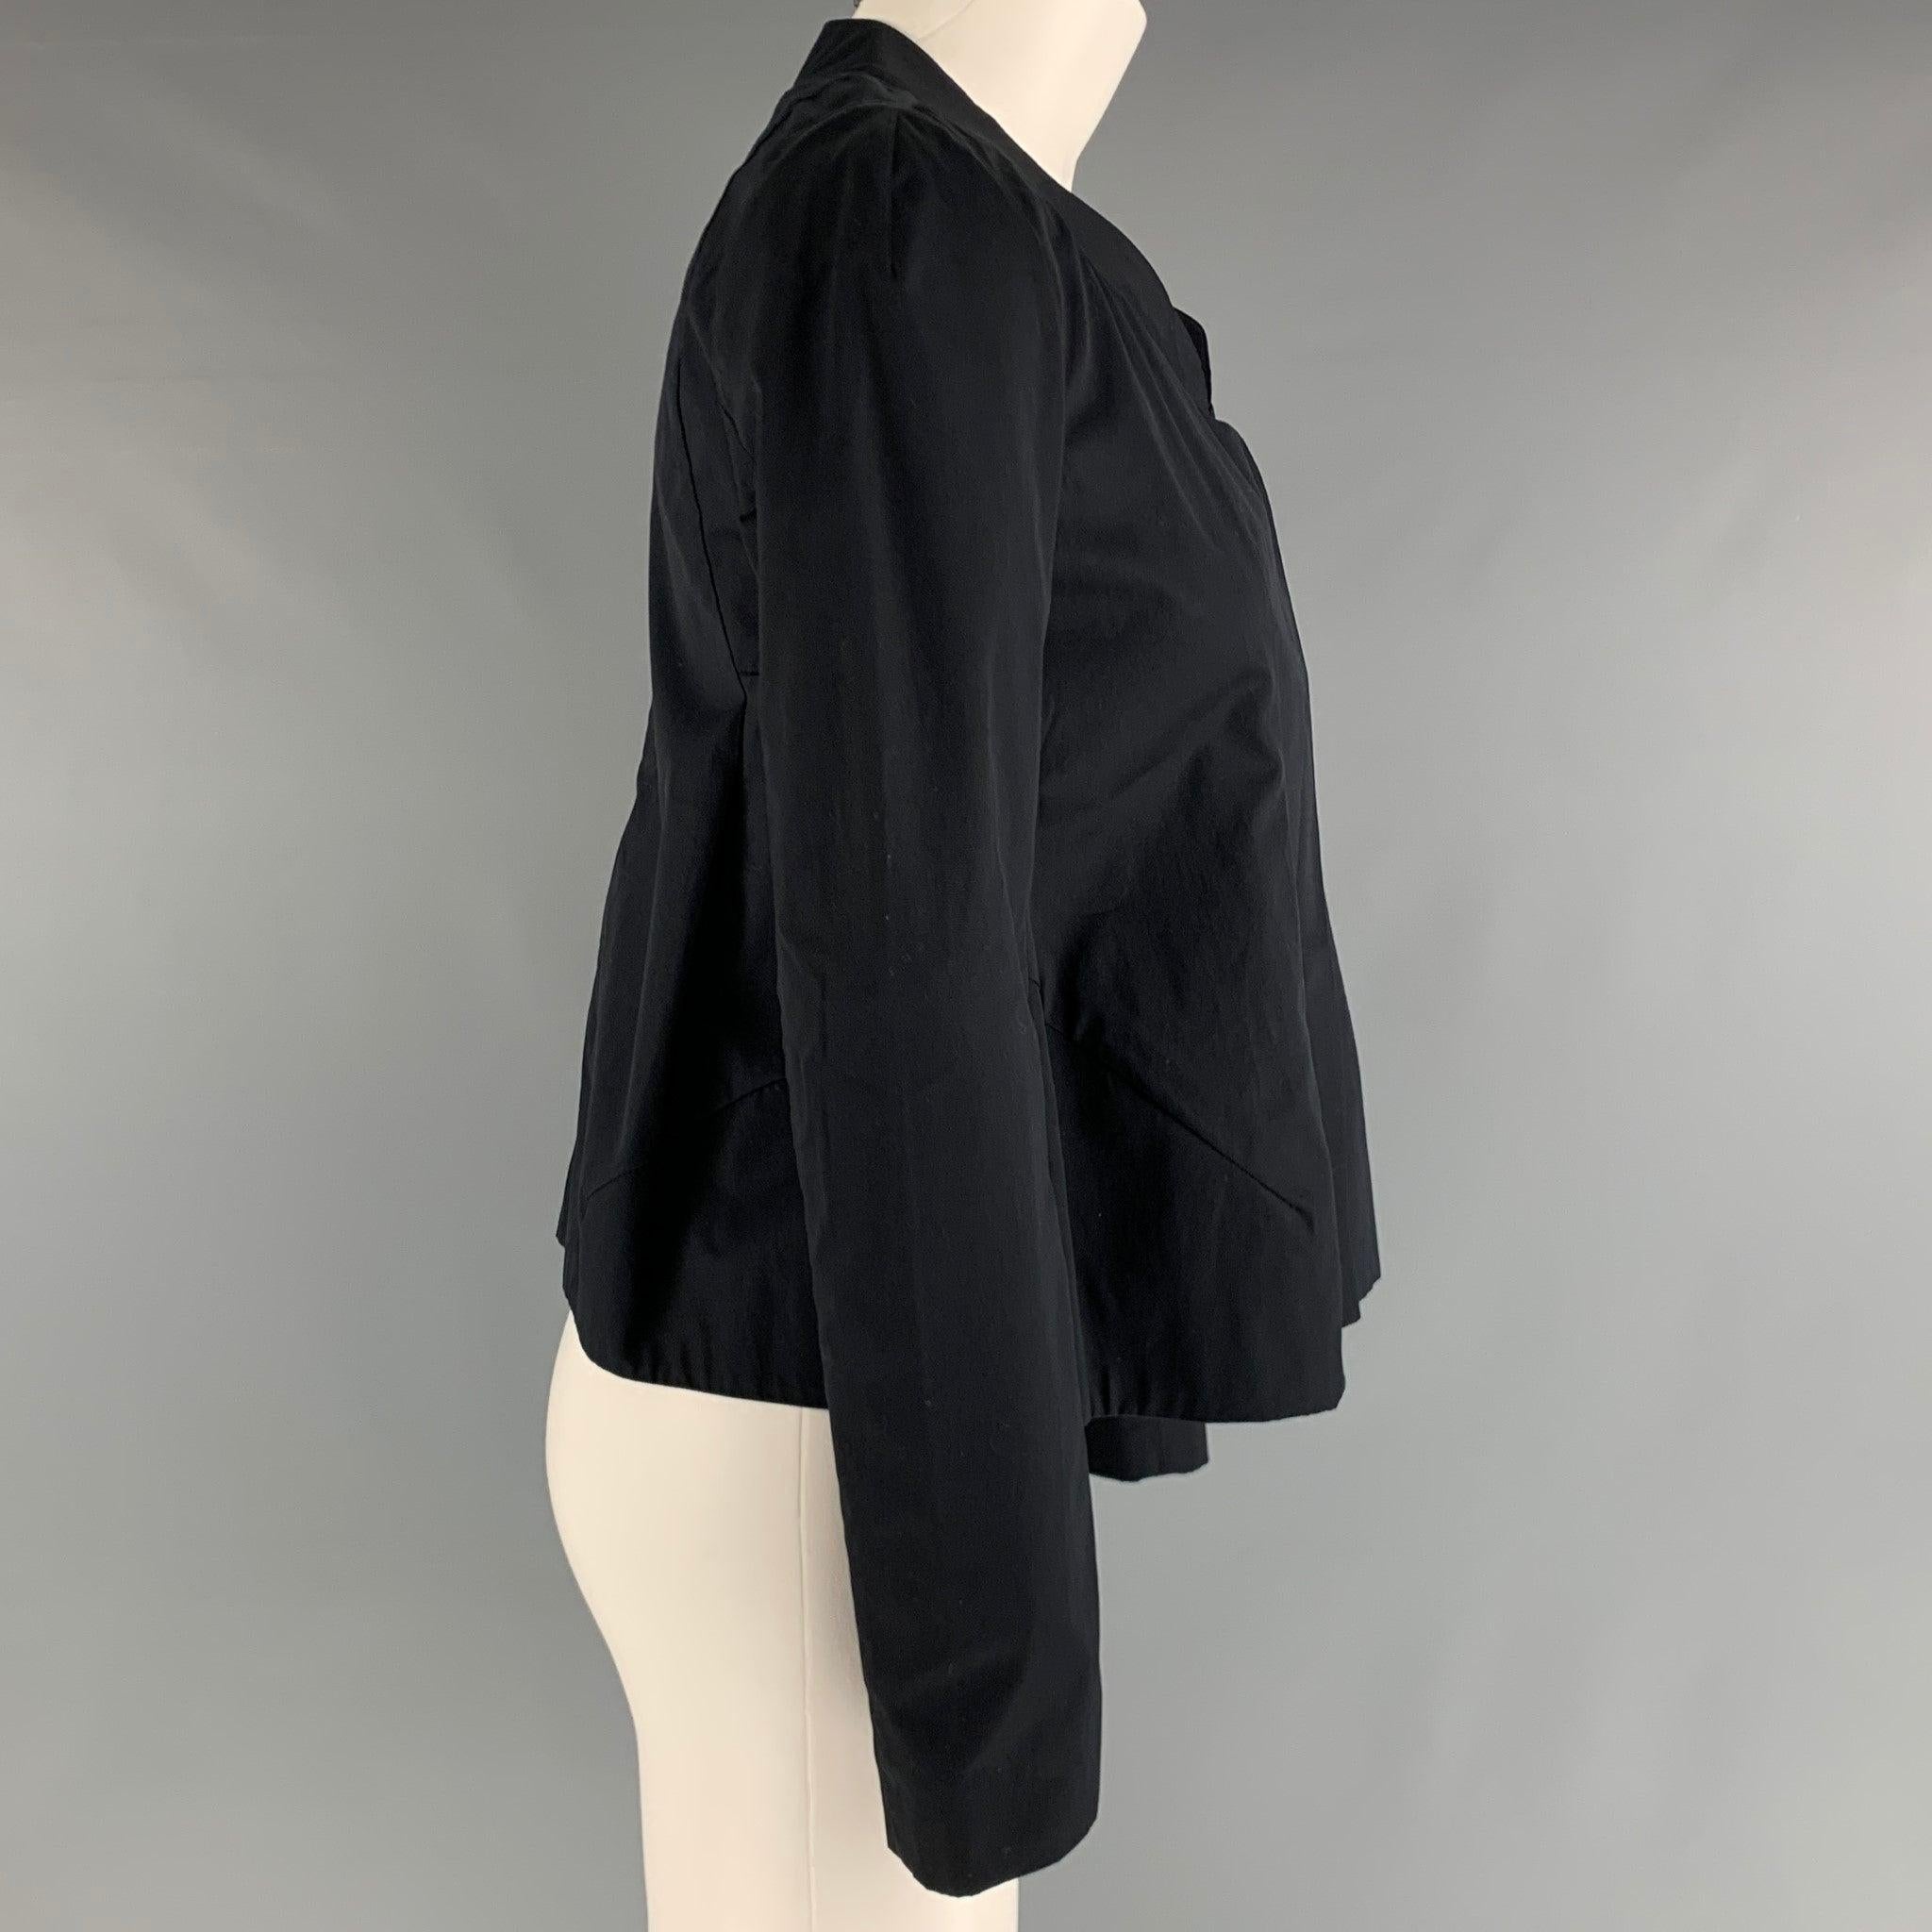 MARNI jacket comes in a black cotton woven material featuring a hidden snap button closure, and a collarless. Made in Italy. Excellent Pre-Owned Condition. 

Marked:   38 

Measurements: 
 
Shoulder: 17.5 inches Bust: 36 inches Sleeve: 17.5 inches